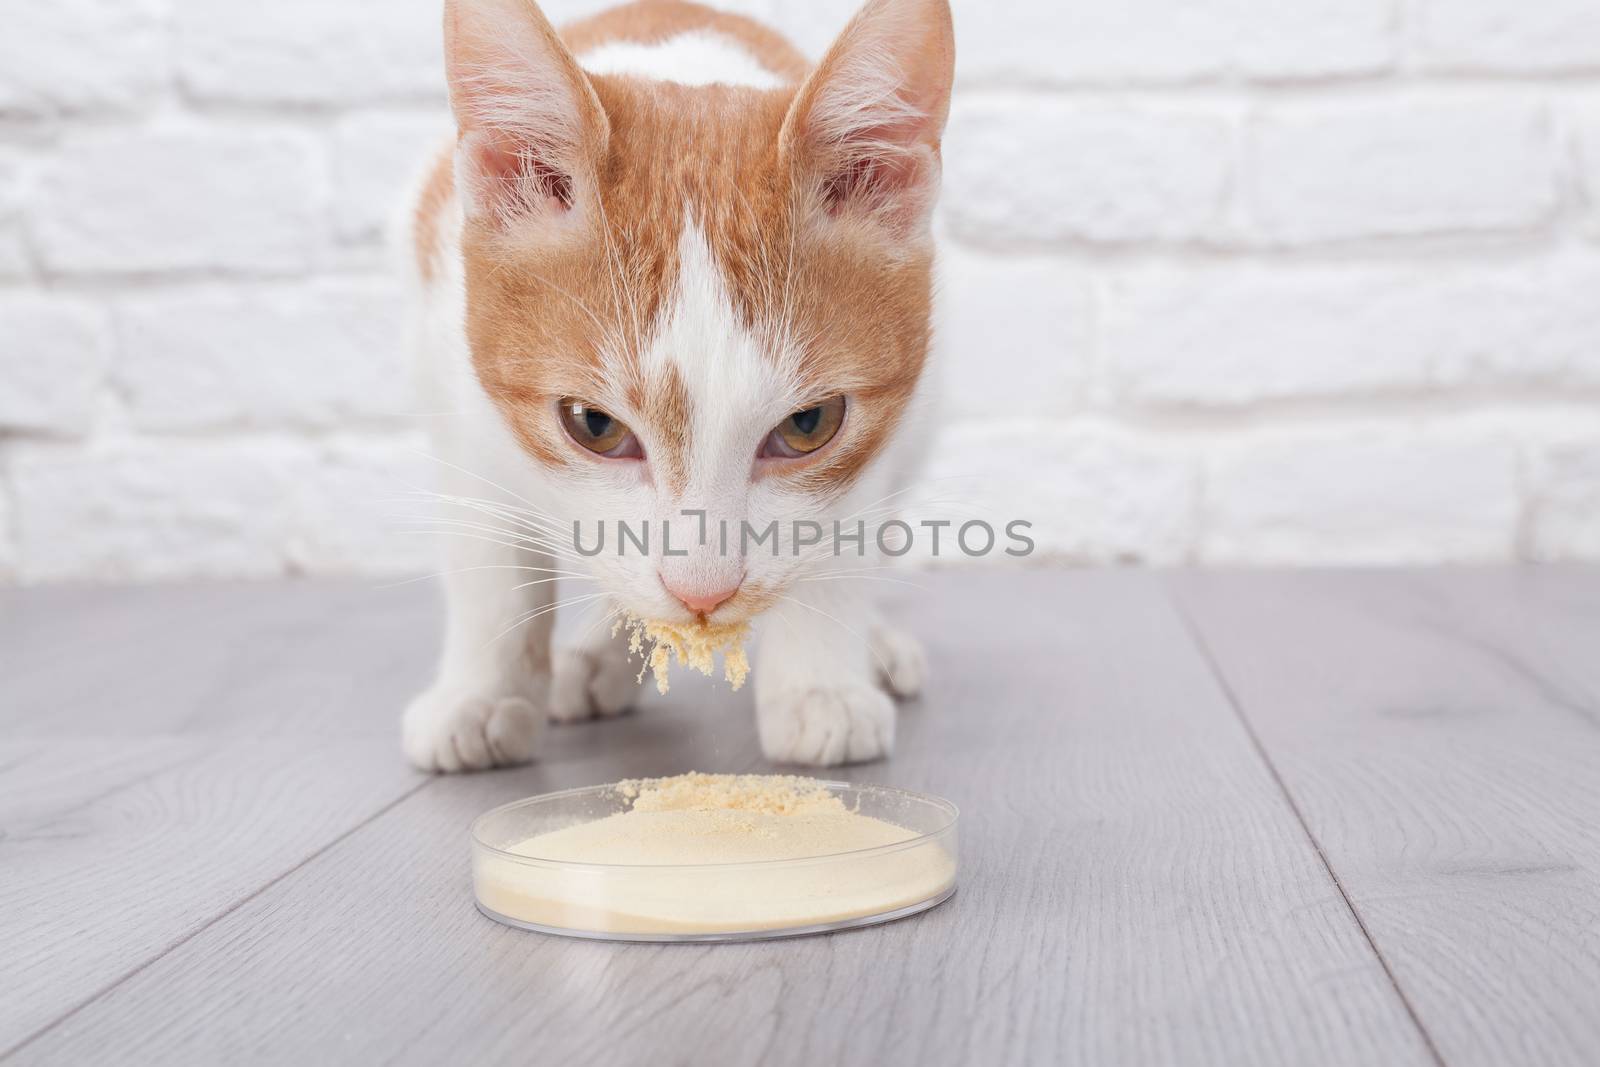 Young red kitten eats dry yeast extract - animal nutritional additive product